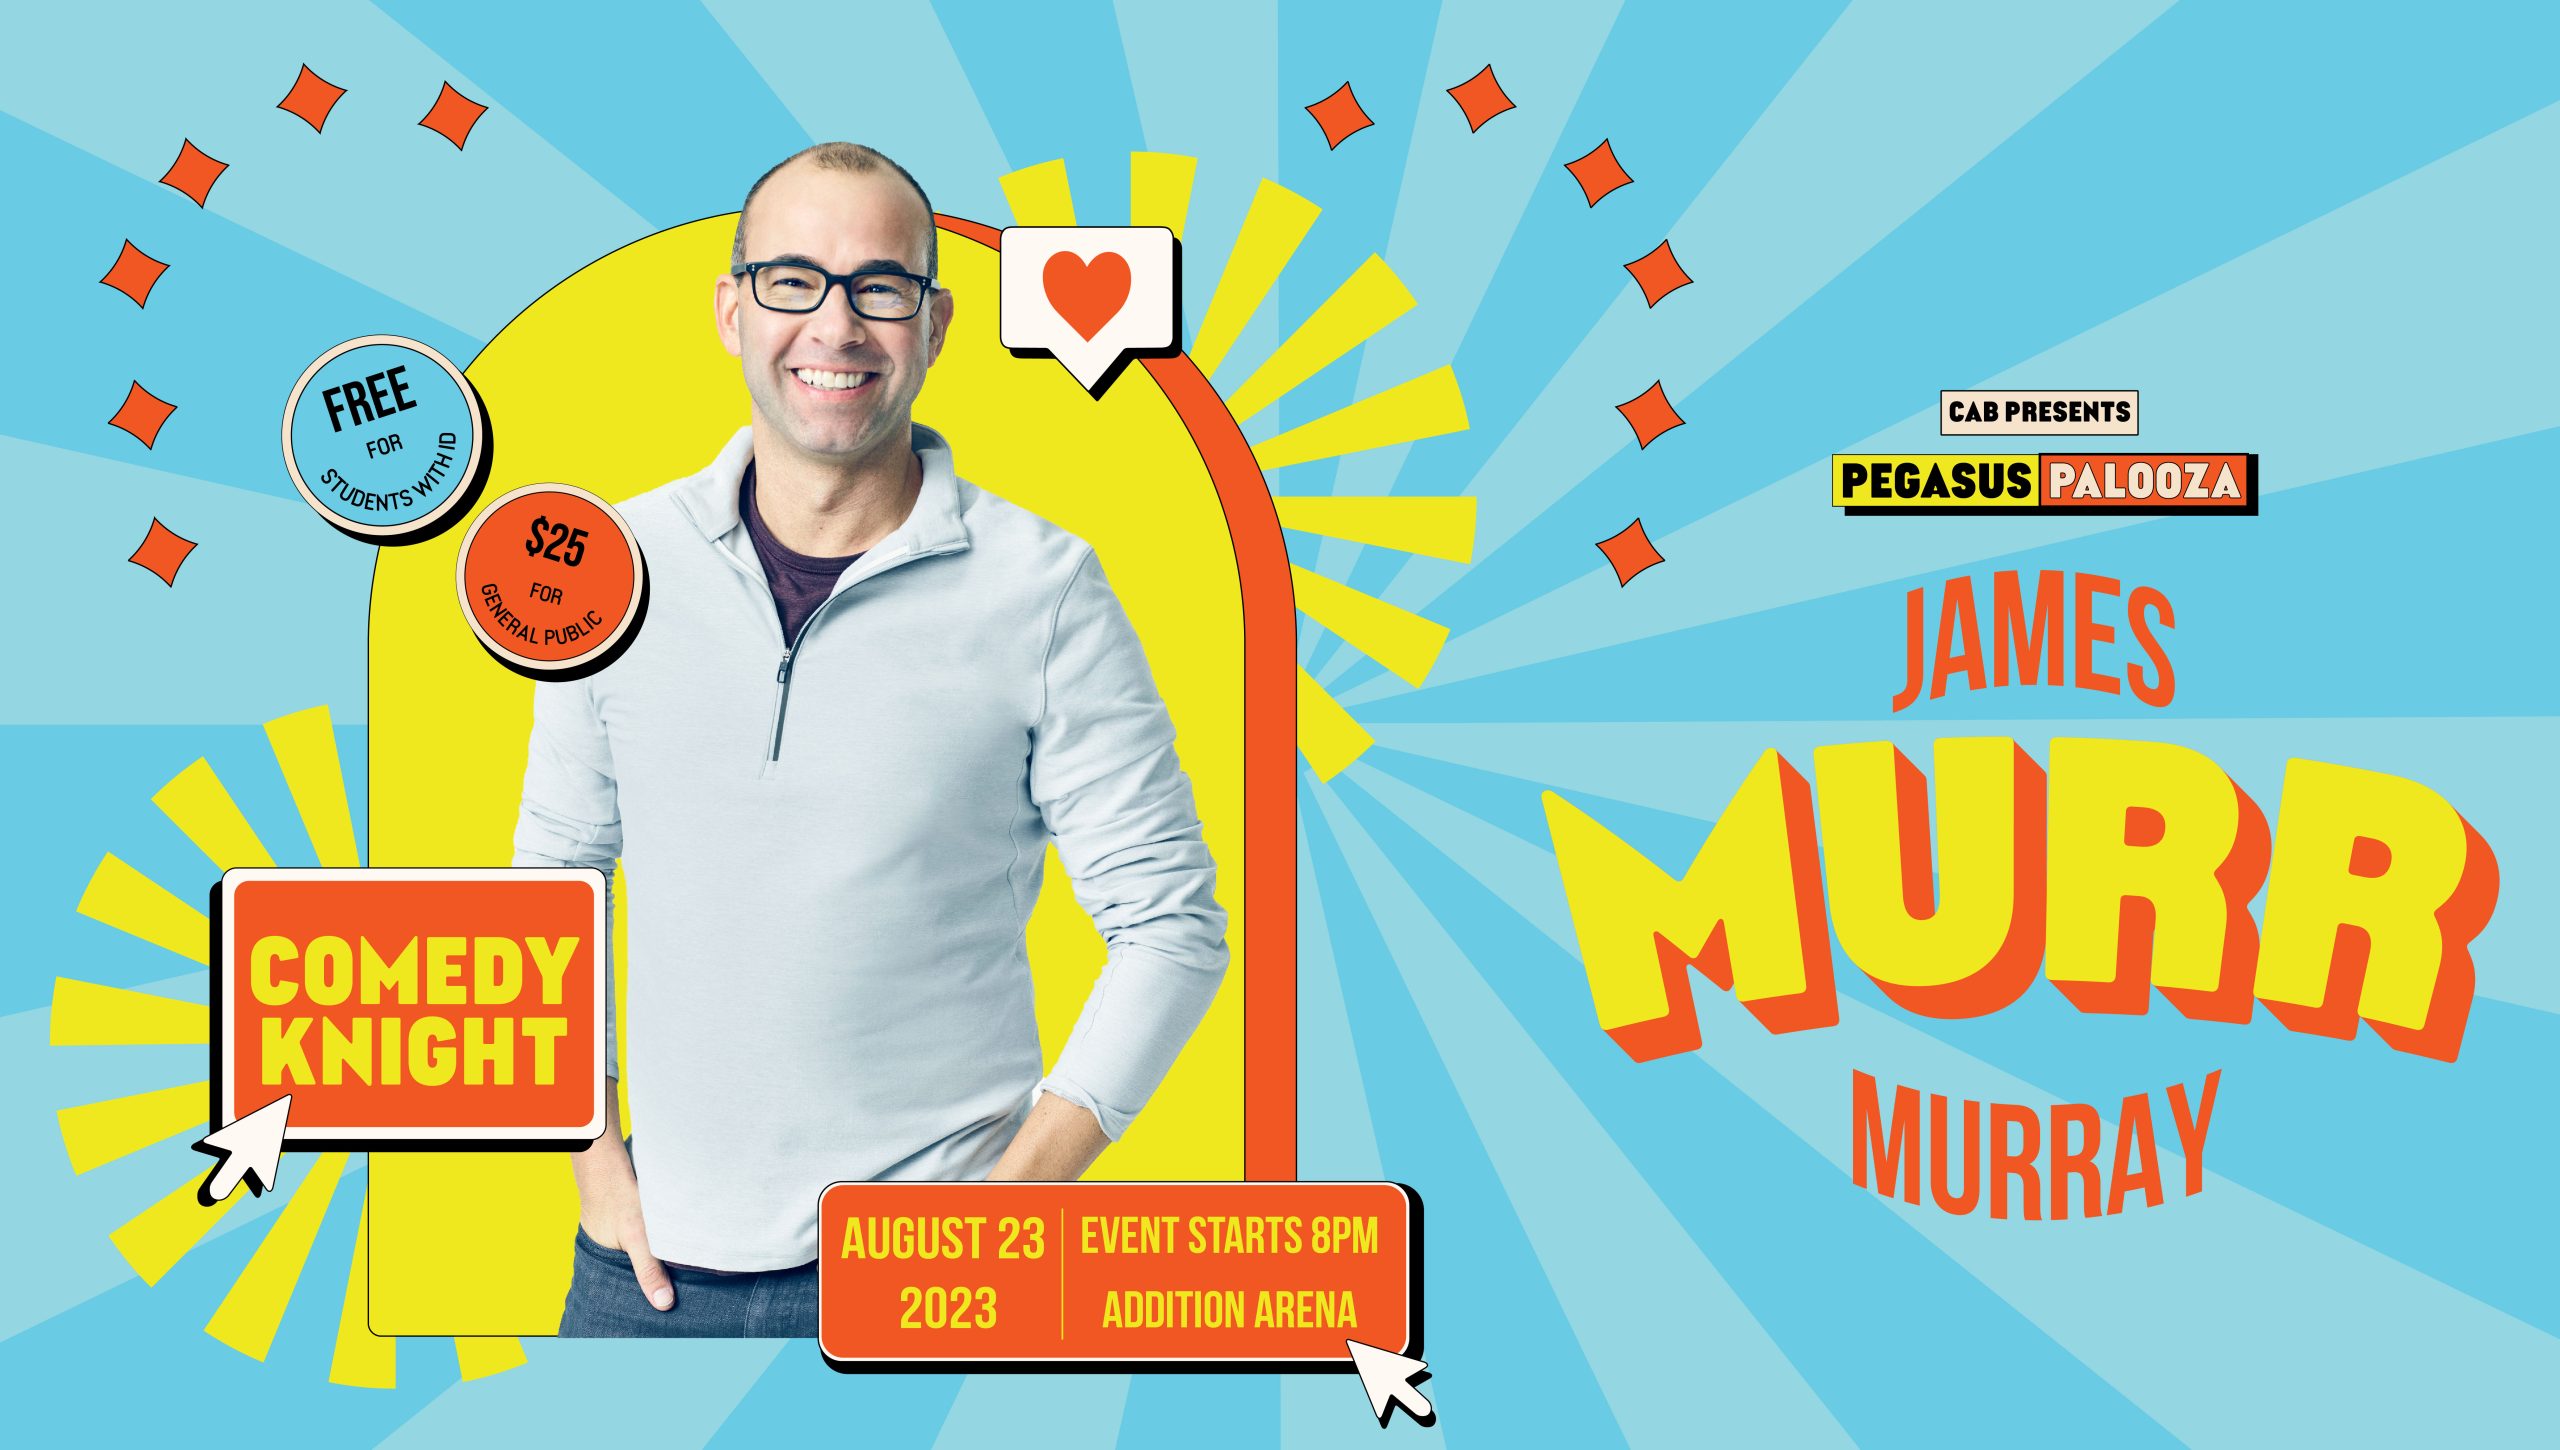 Illustration of James Murray on the left with the following text: Comedy Knight; Free for students with ID; $25 for general public; August 23, 2023; Events starts 8PM, Addition Arena